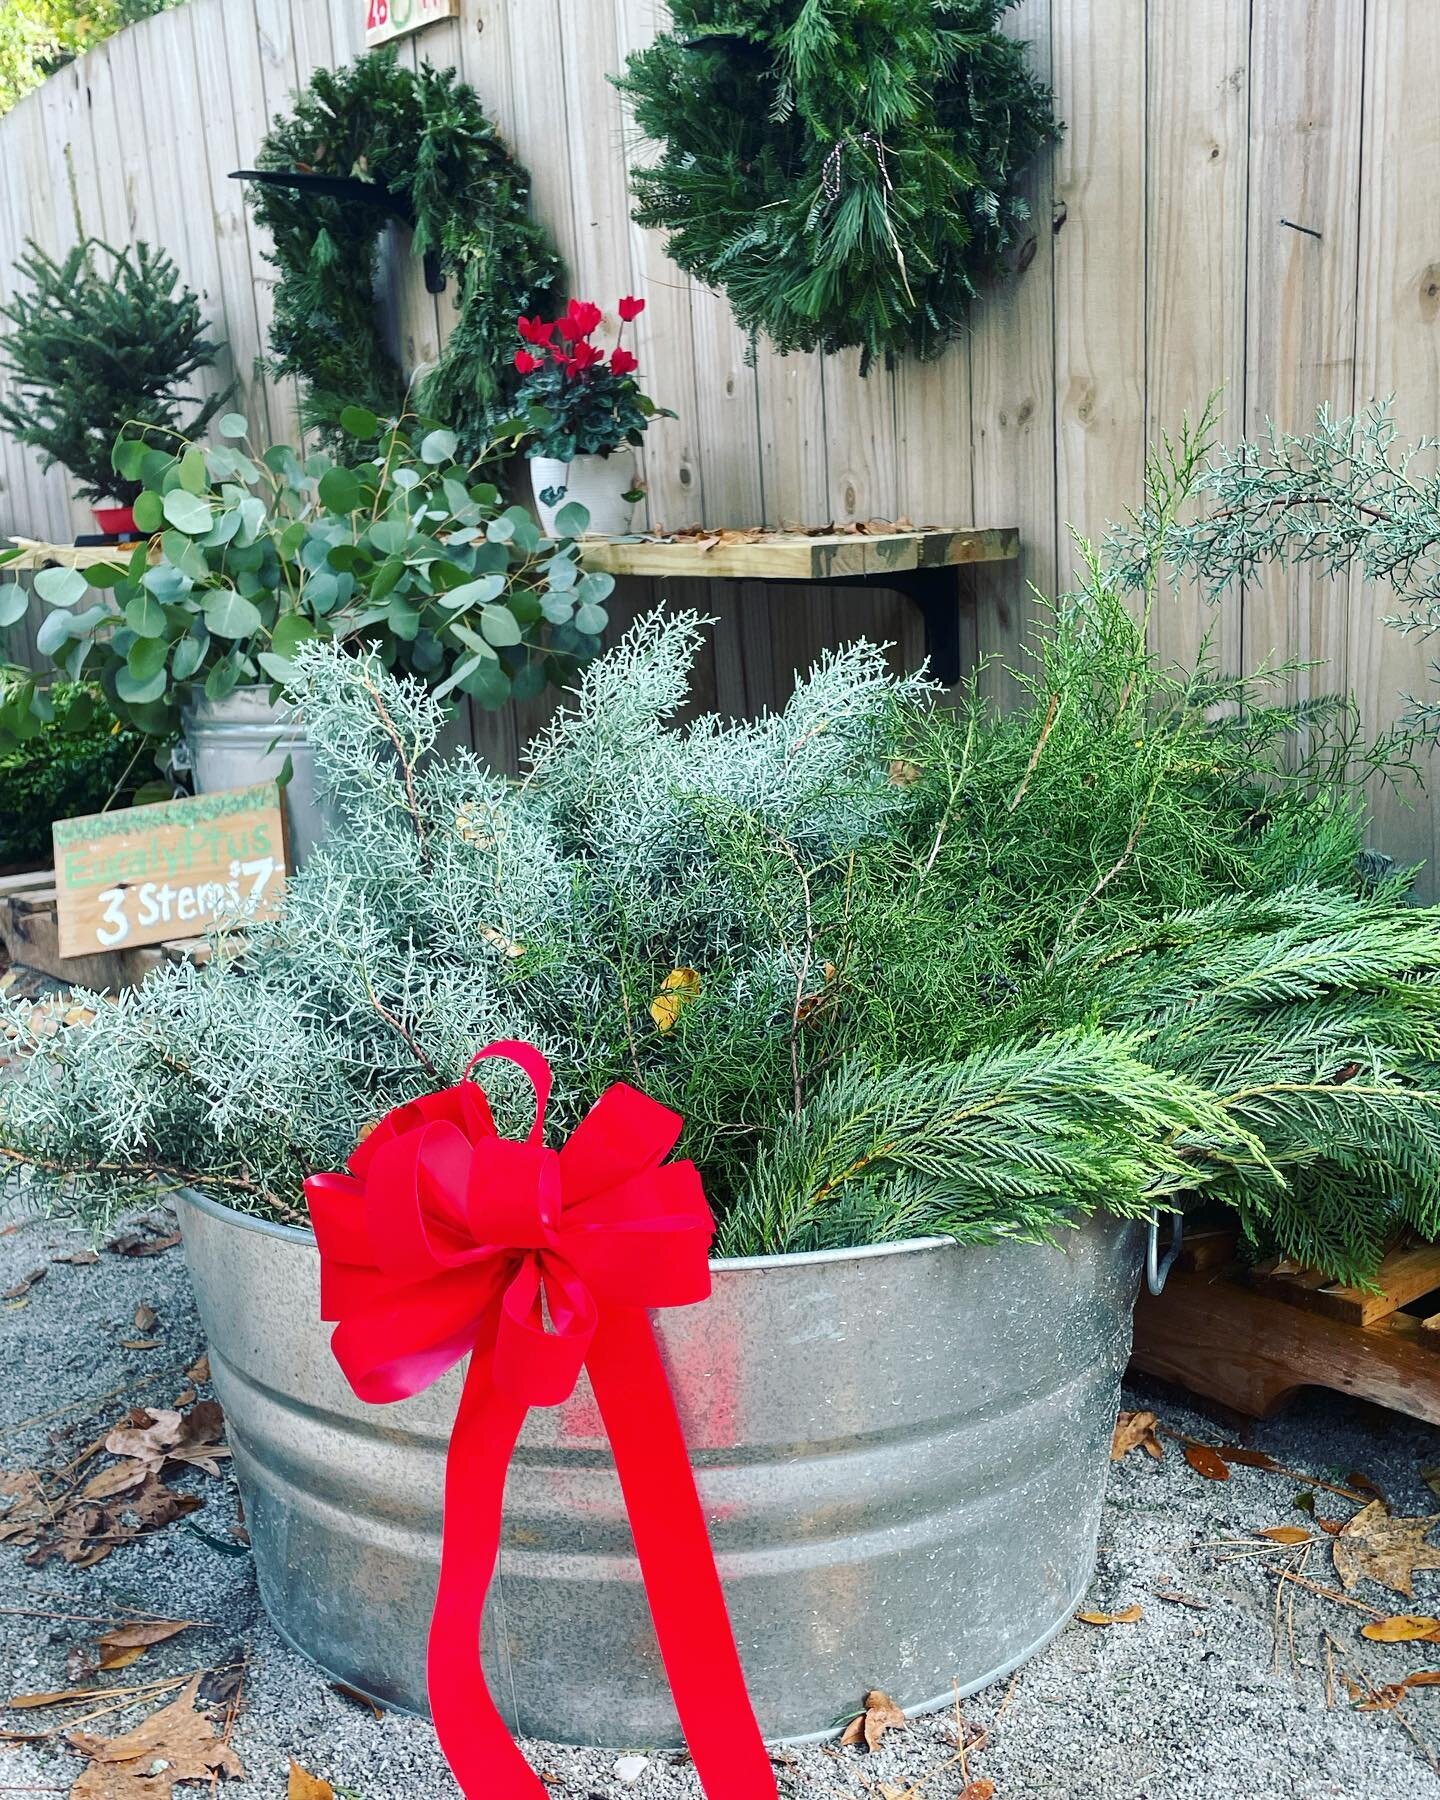 Decking the halls! 🎄🎶
.
Cabana Christmas Trees &amp; Holiday Market! Open daily, 9am - 7pm.
.
Fresh cut Fraser Fir trees, greenery, garlands, bows, wreaths, excellent service and more.
.
We love being a part of your holiday traditions!

💚❤️💚